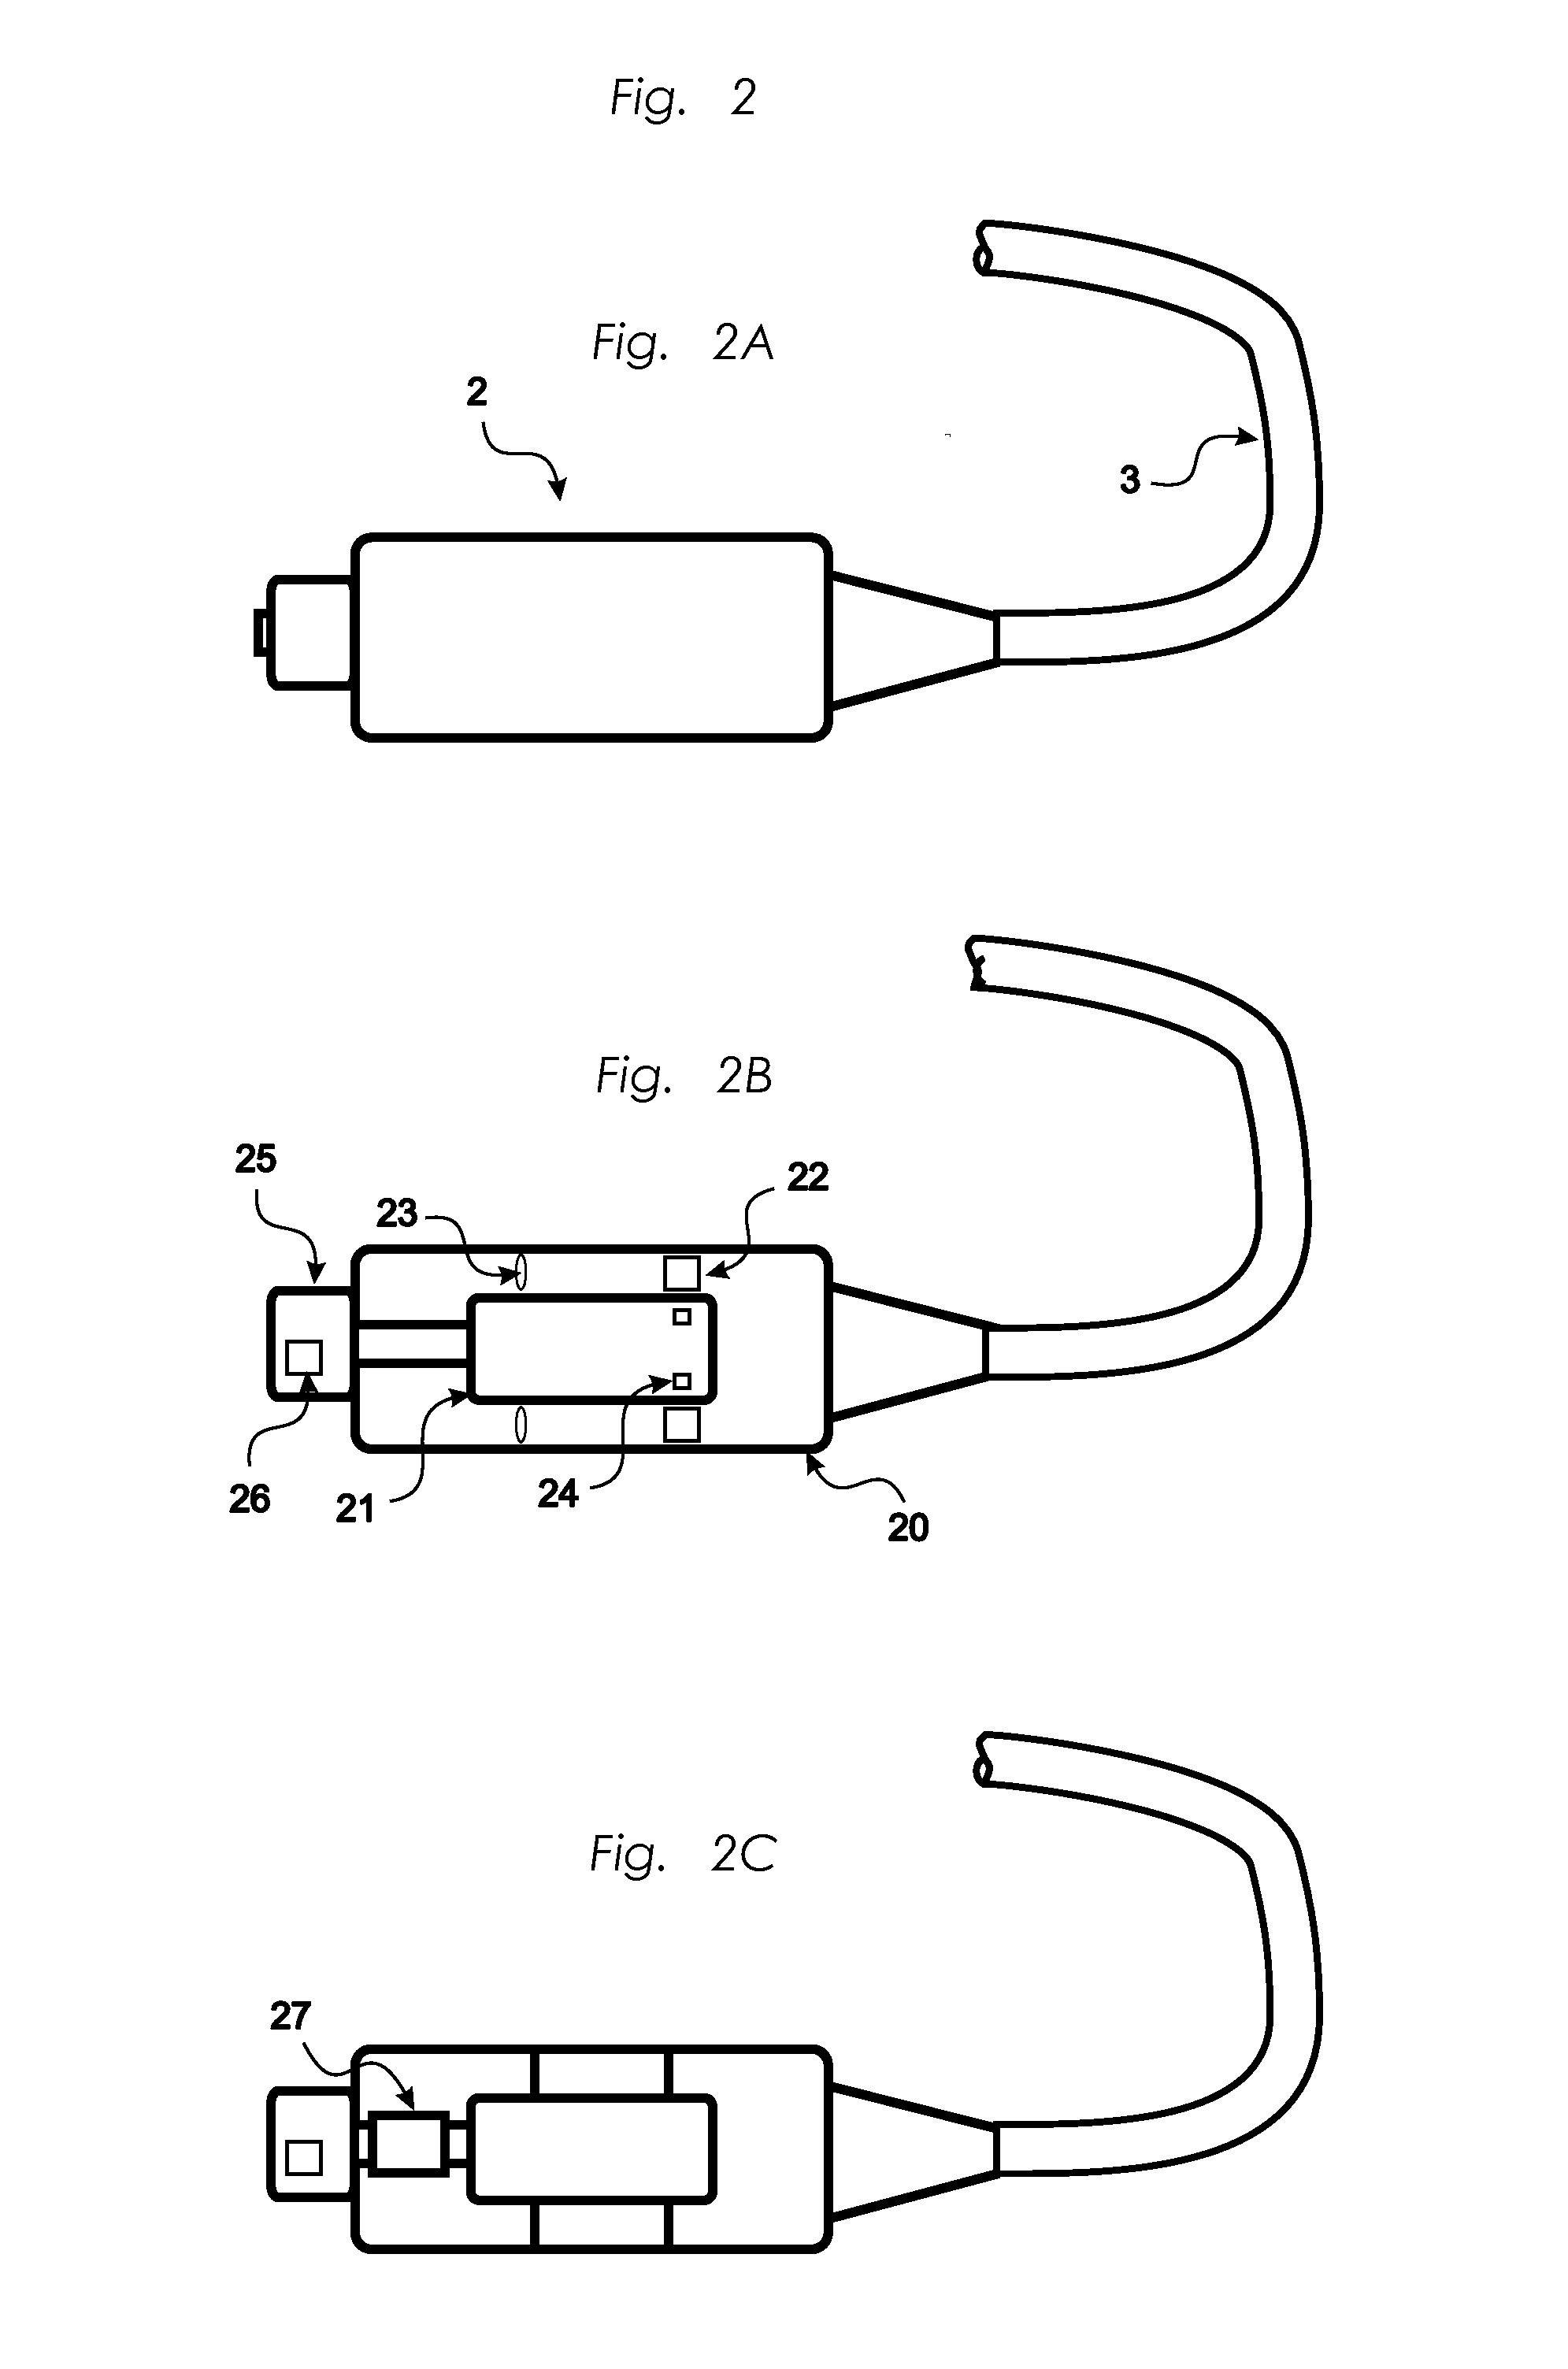 Status control for electrically powered surgical tool systems